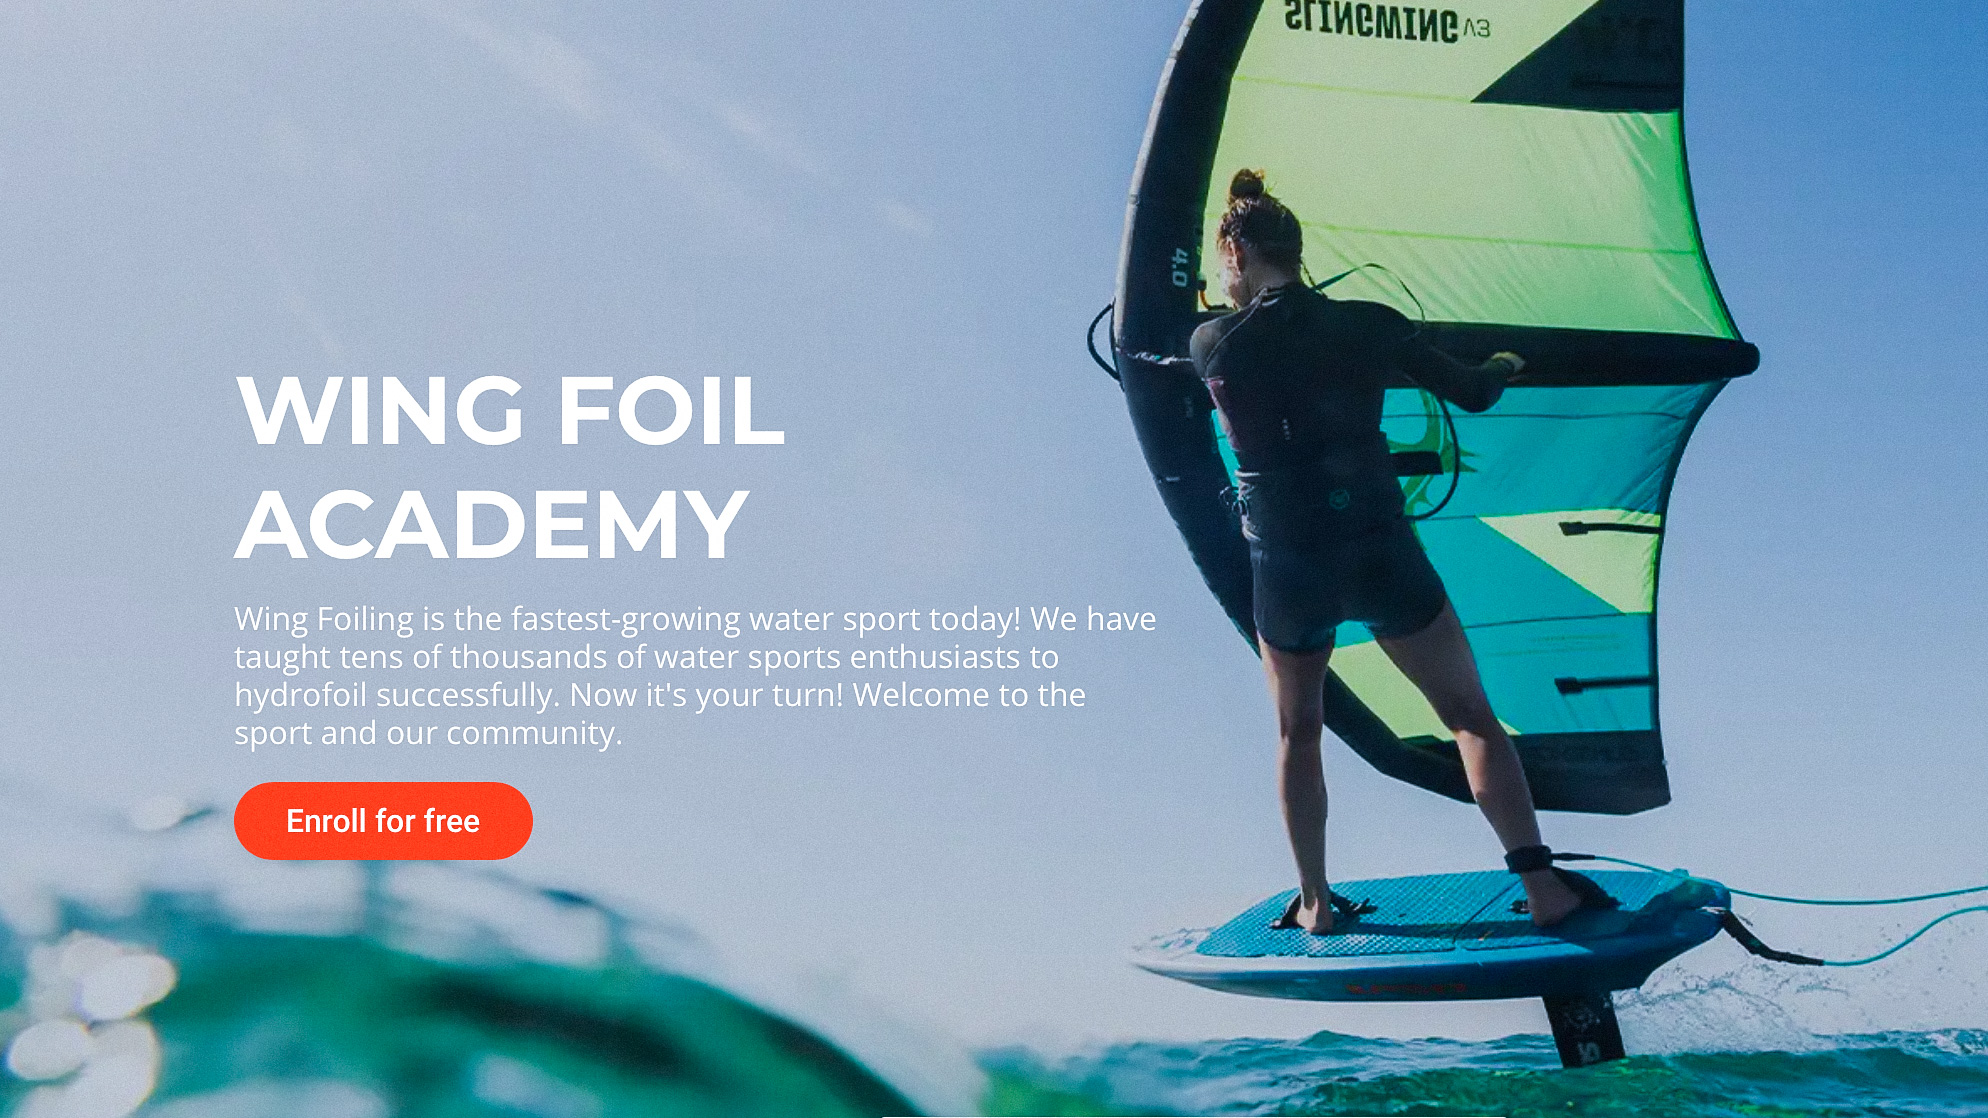 Learn it All With the Slingshot Wing Foil Academy! - MACkite Boardsports  Center